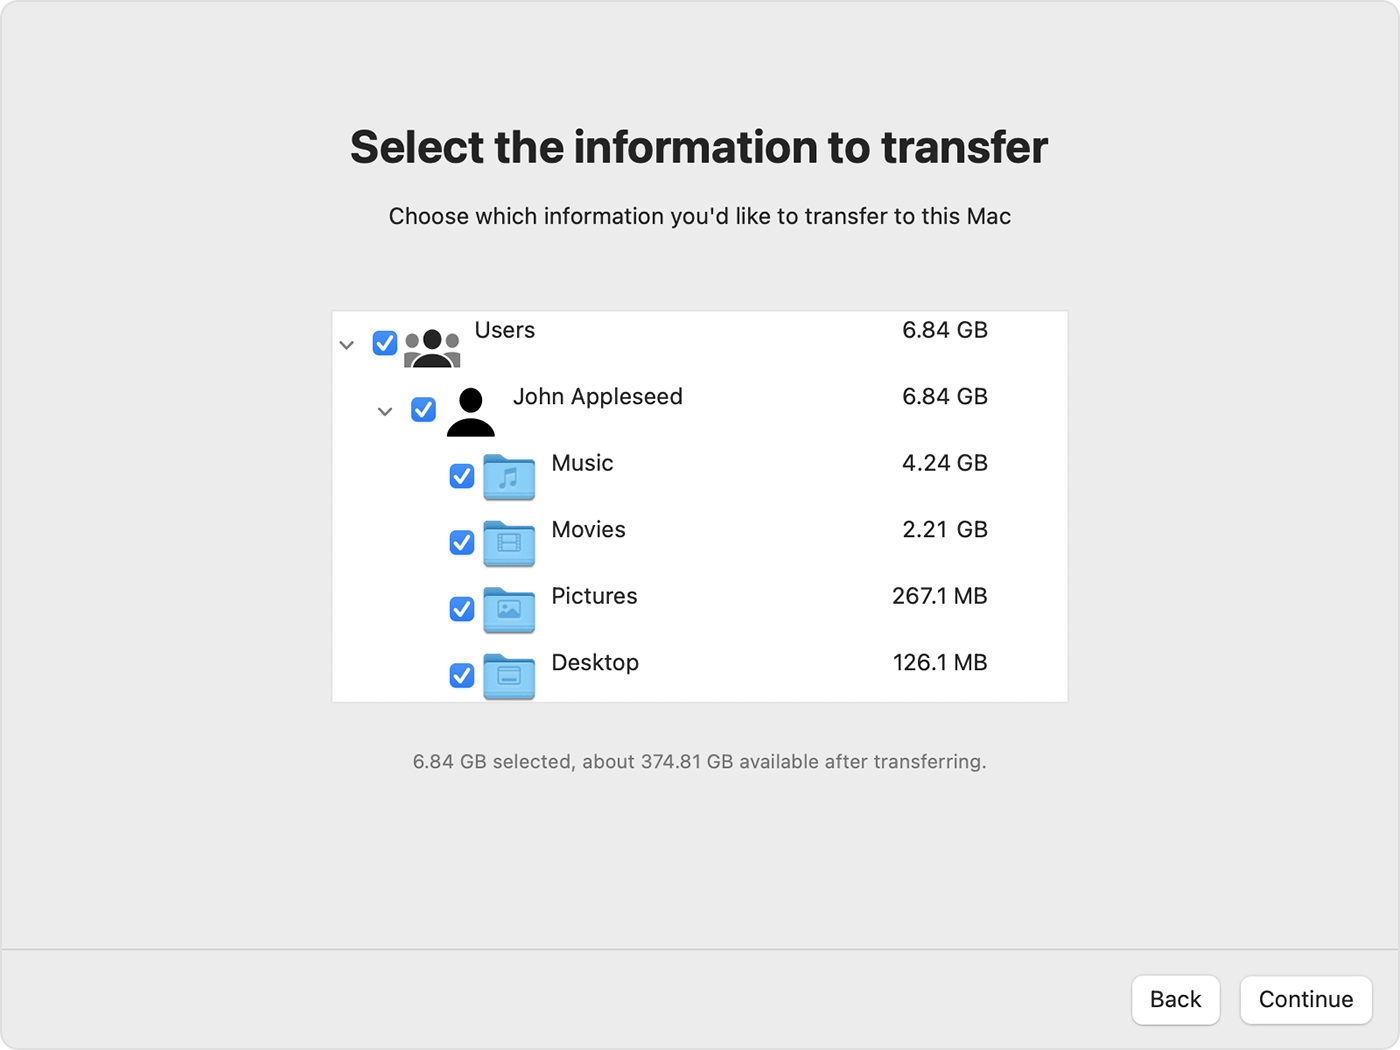 Migration Assistant on Mac: Select information to transfer